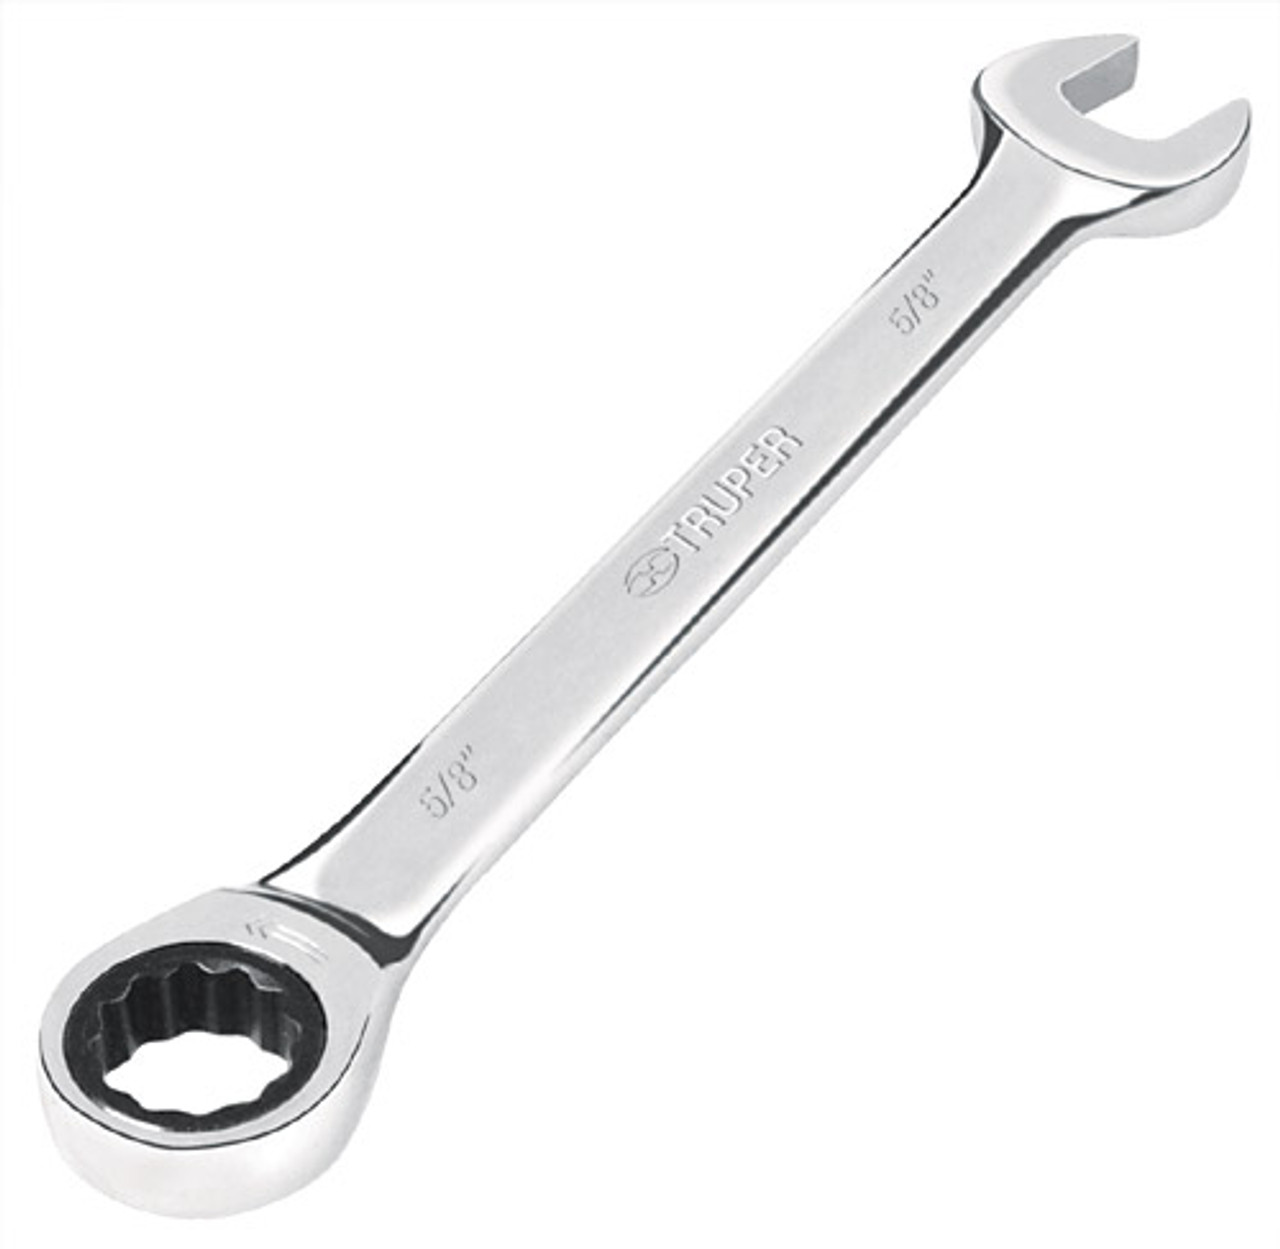 Truper 13mmx7" Combination Ratcheting Wrench #15745